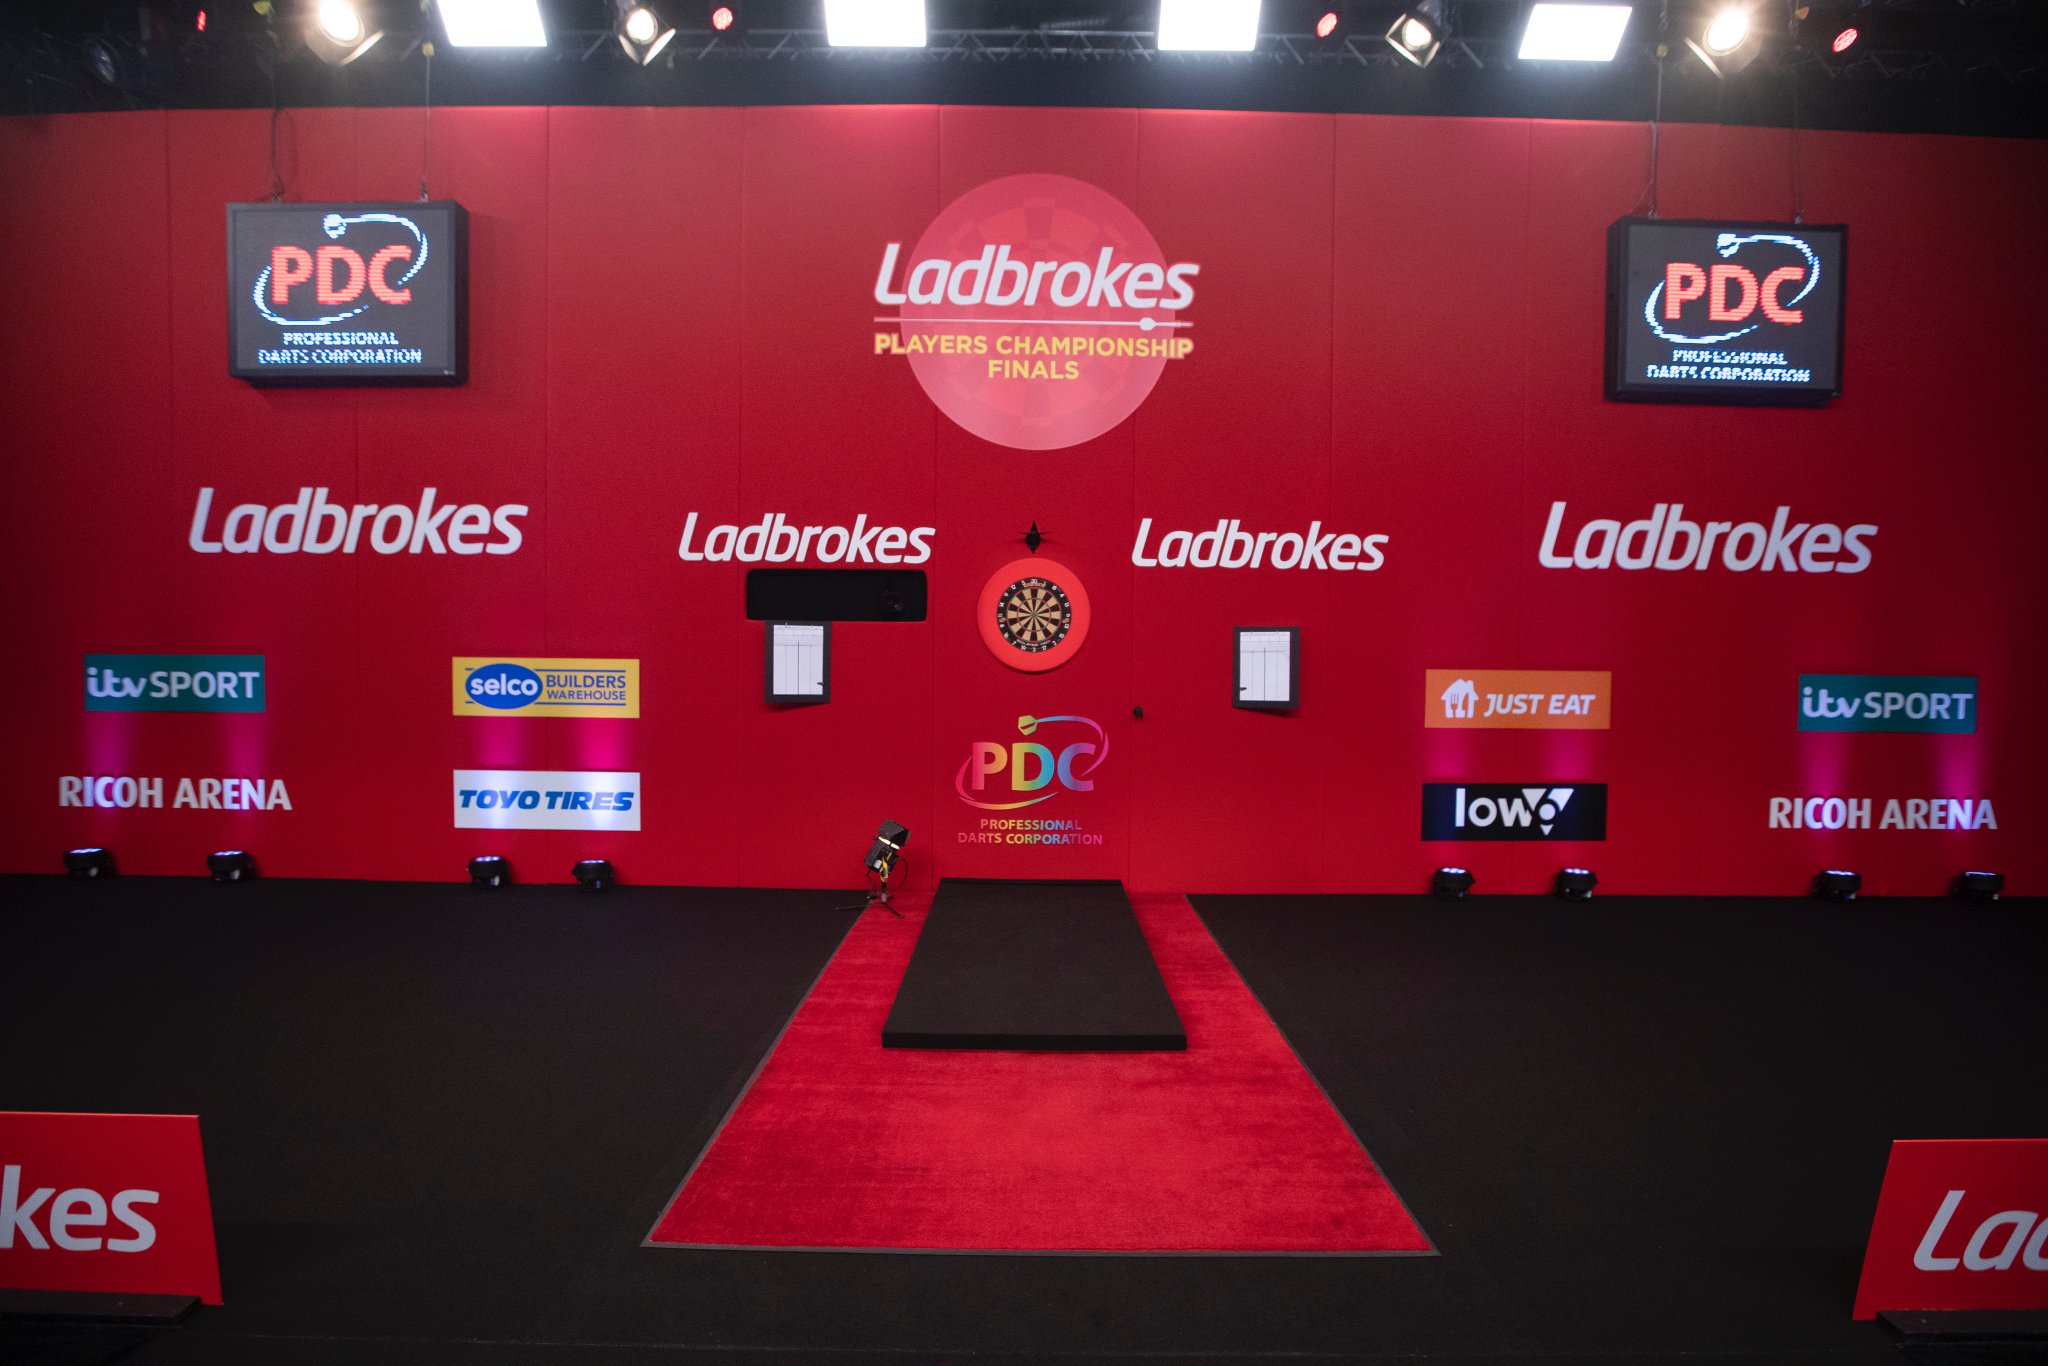 Ladbrokes Players Championship Finals: Day Two Live Blog